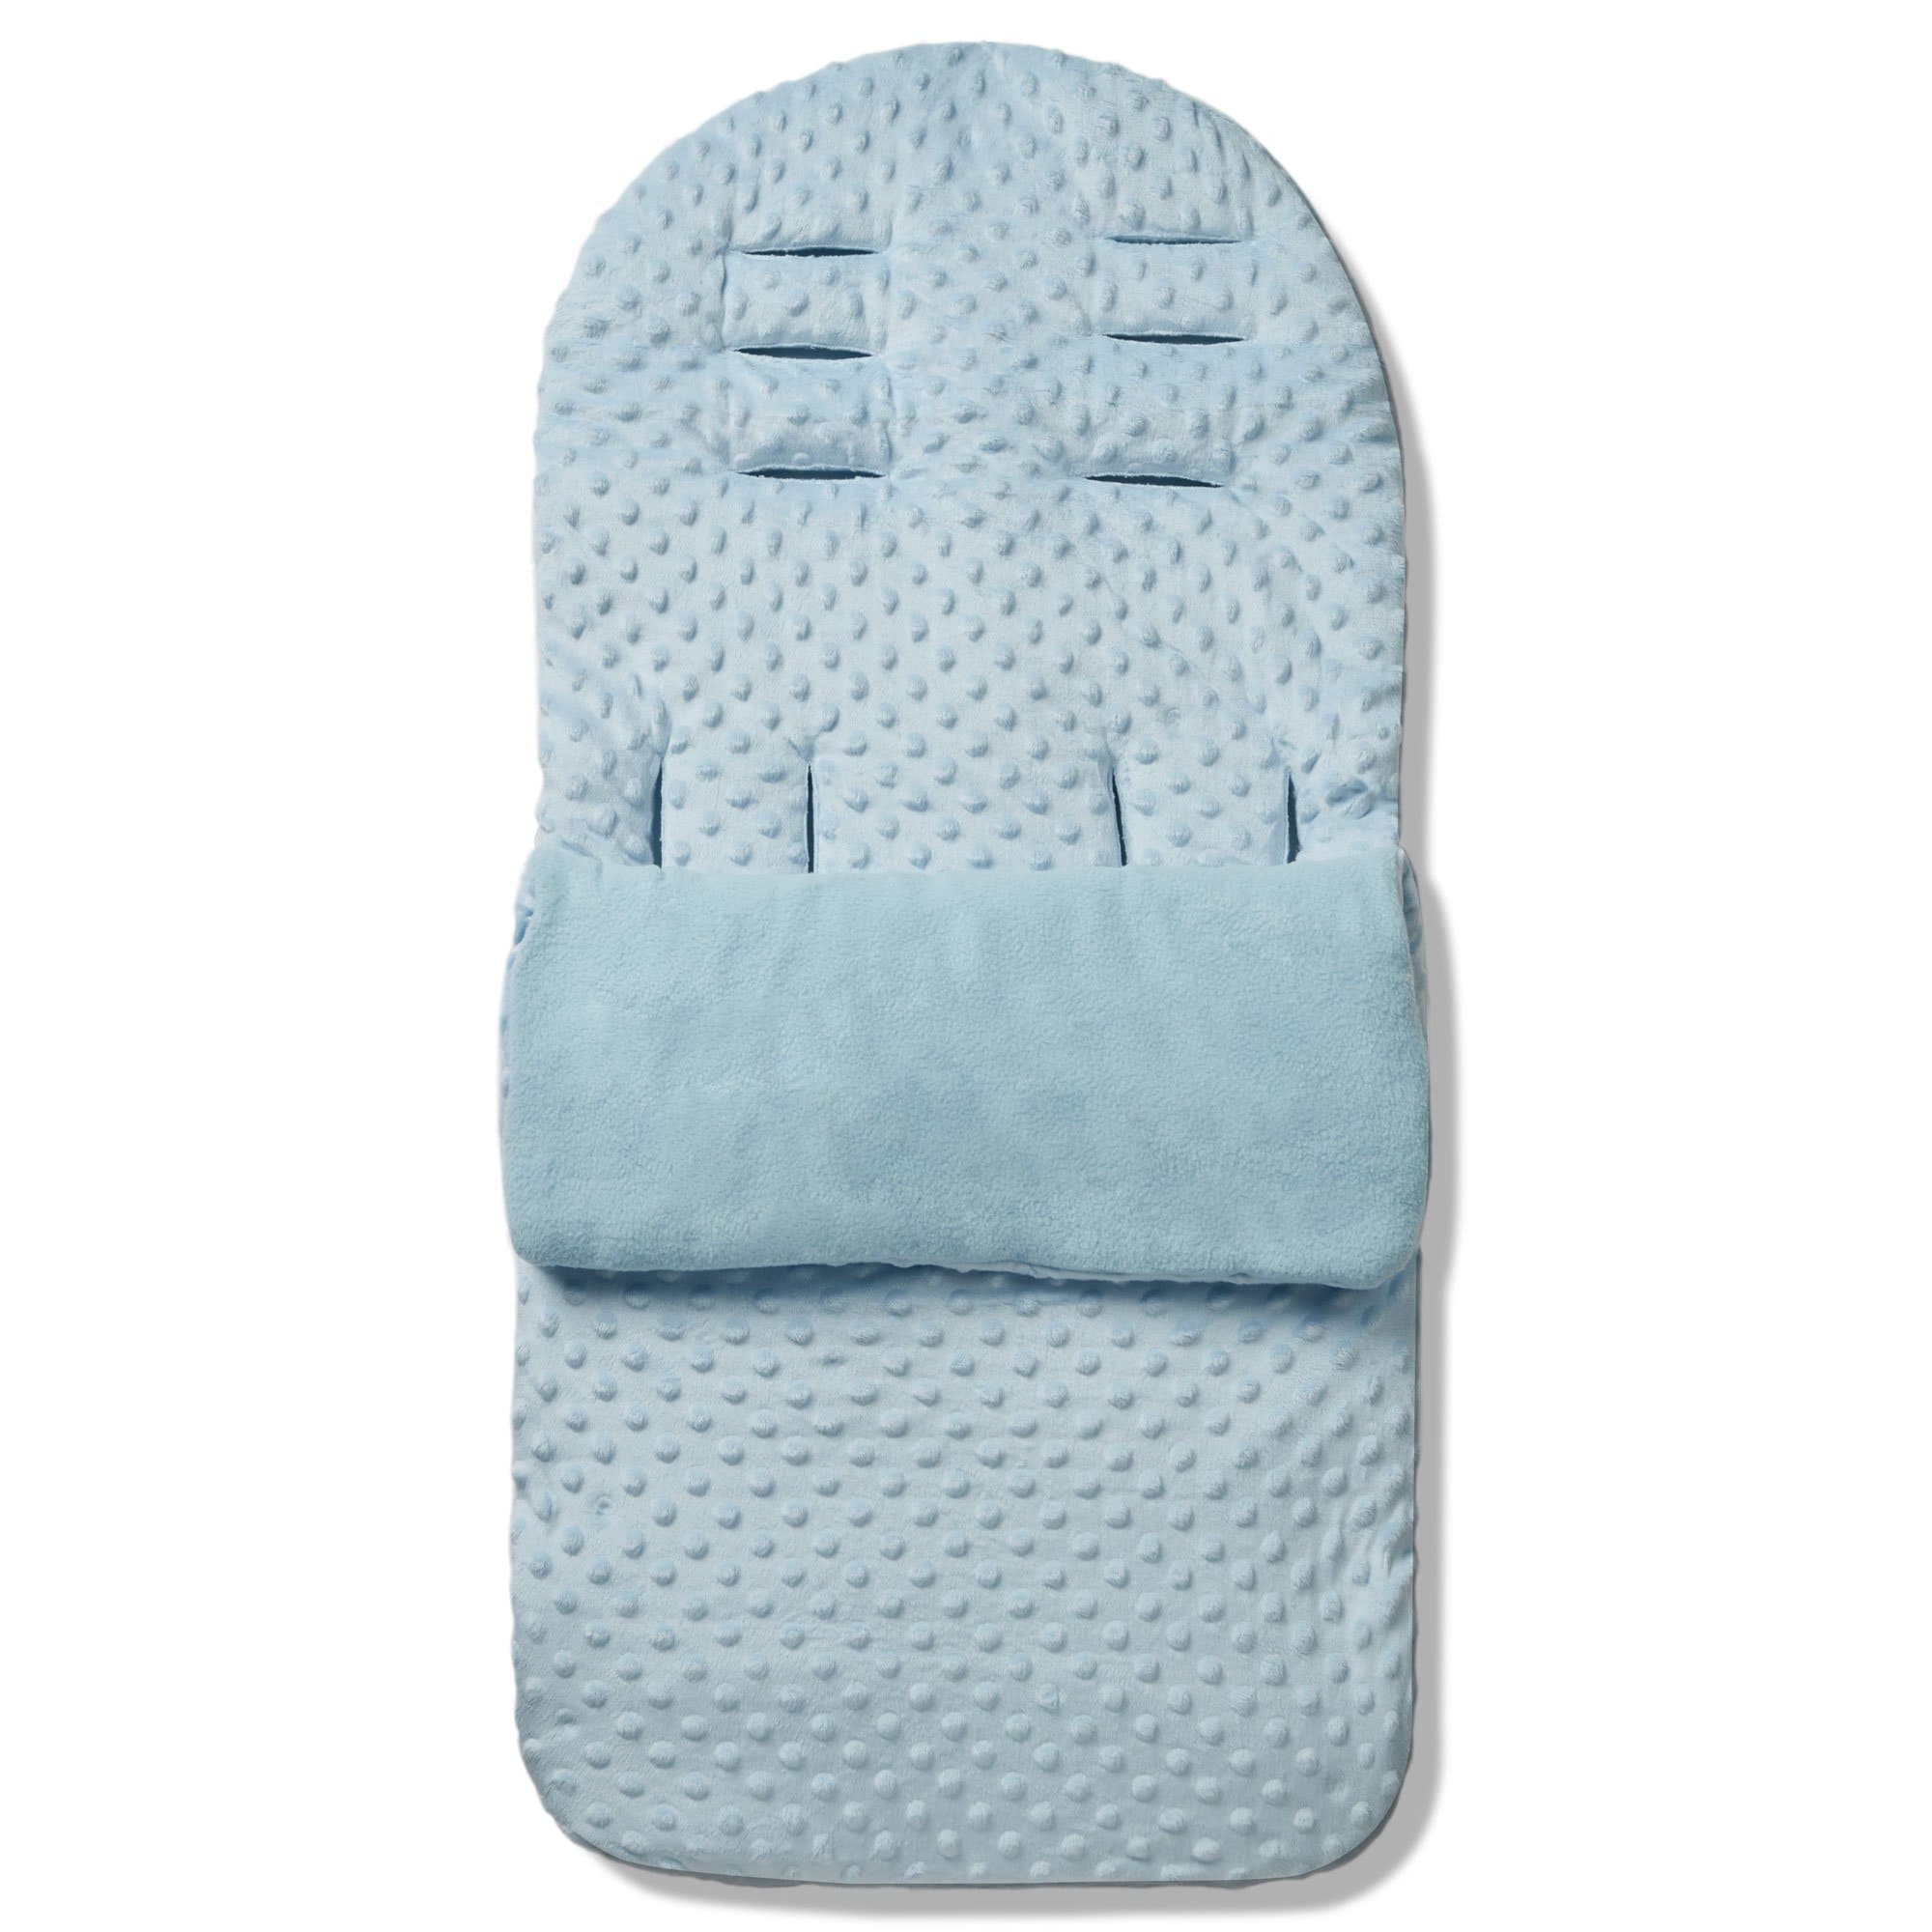 Dimple Footmuff / Cosy Toes Compatible with Orbit Baby - Blue / Fits All Models | For Your Little One